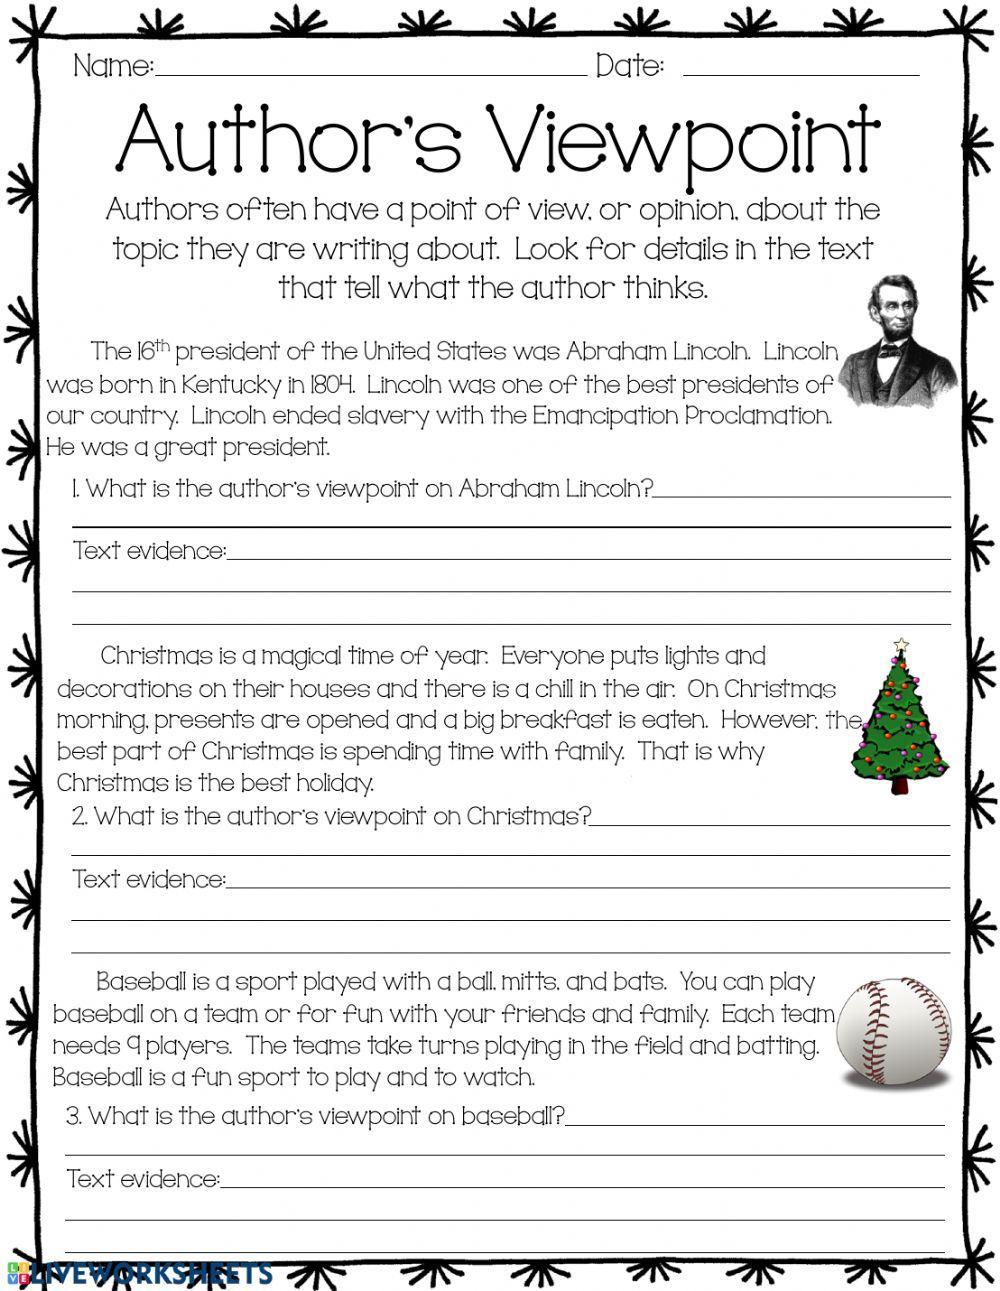 Author's Viewpoint